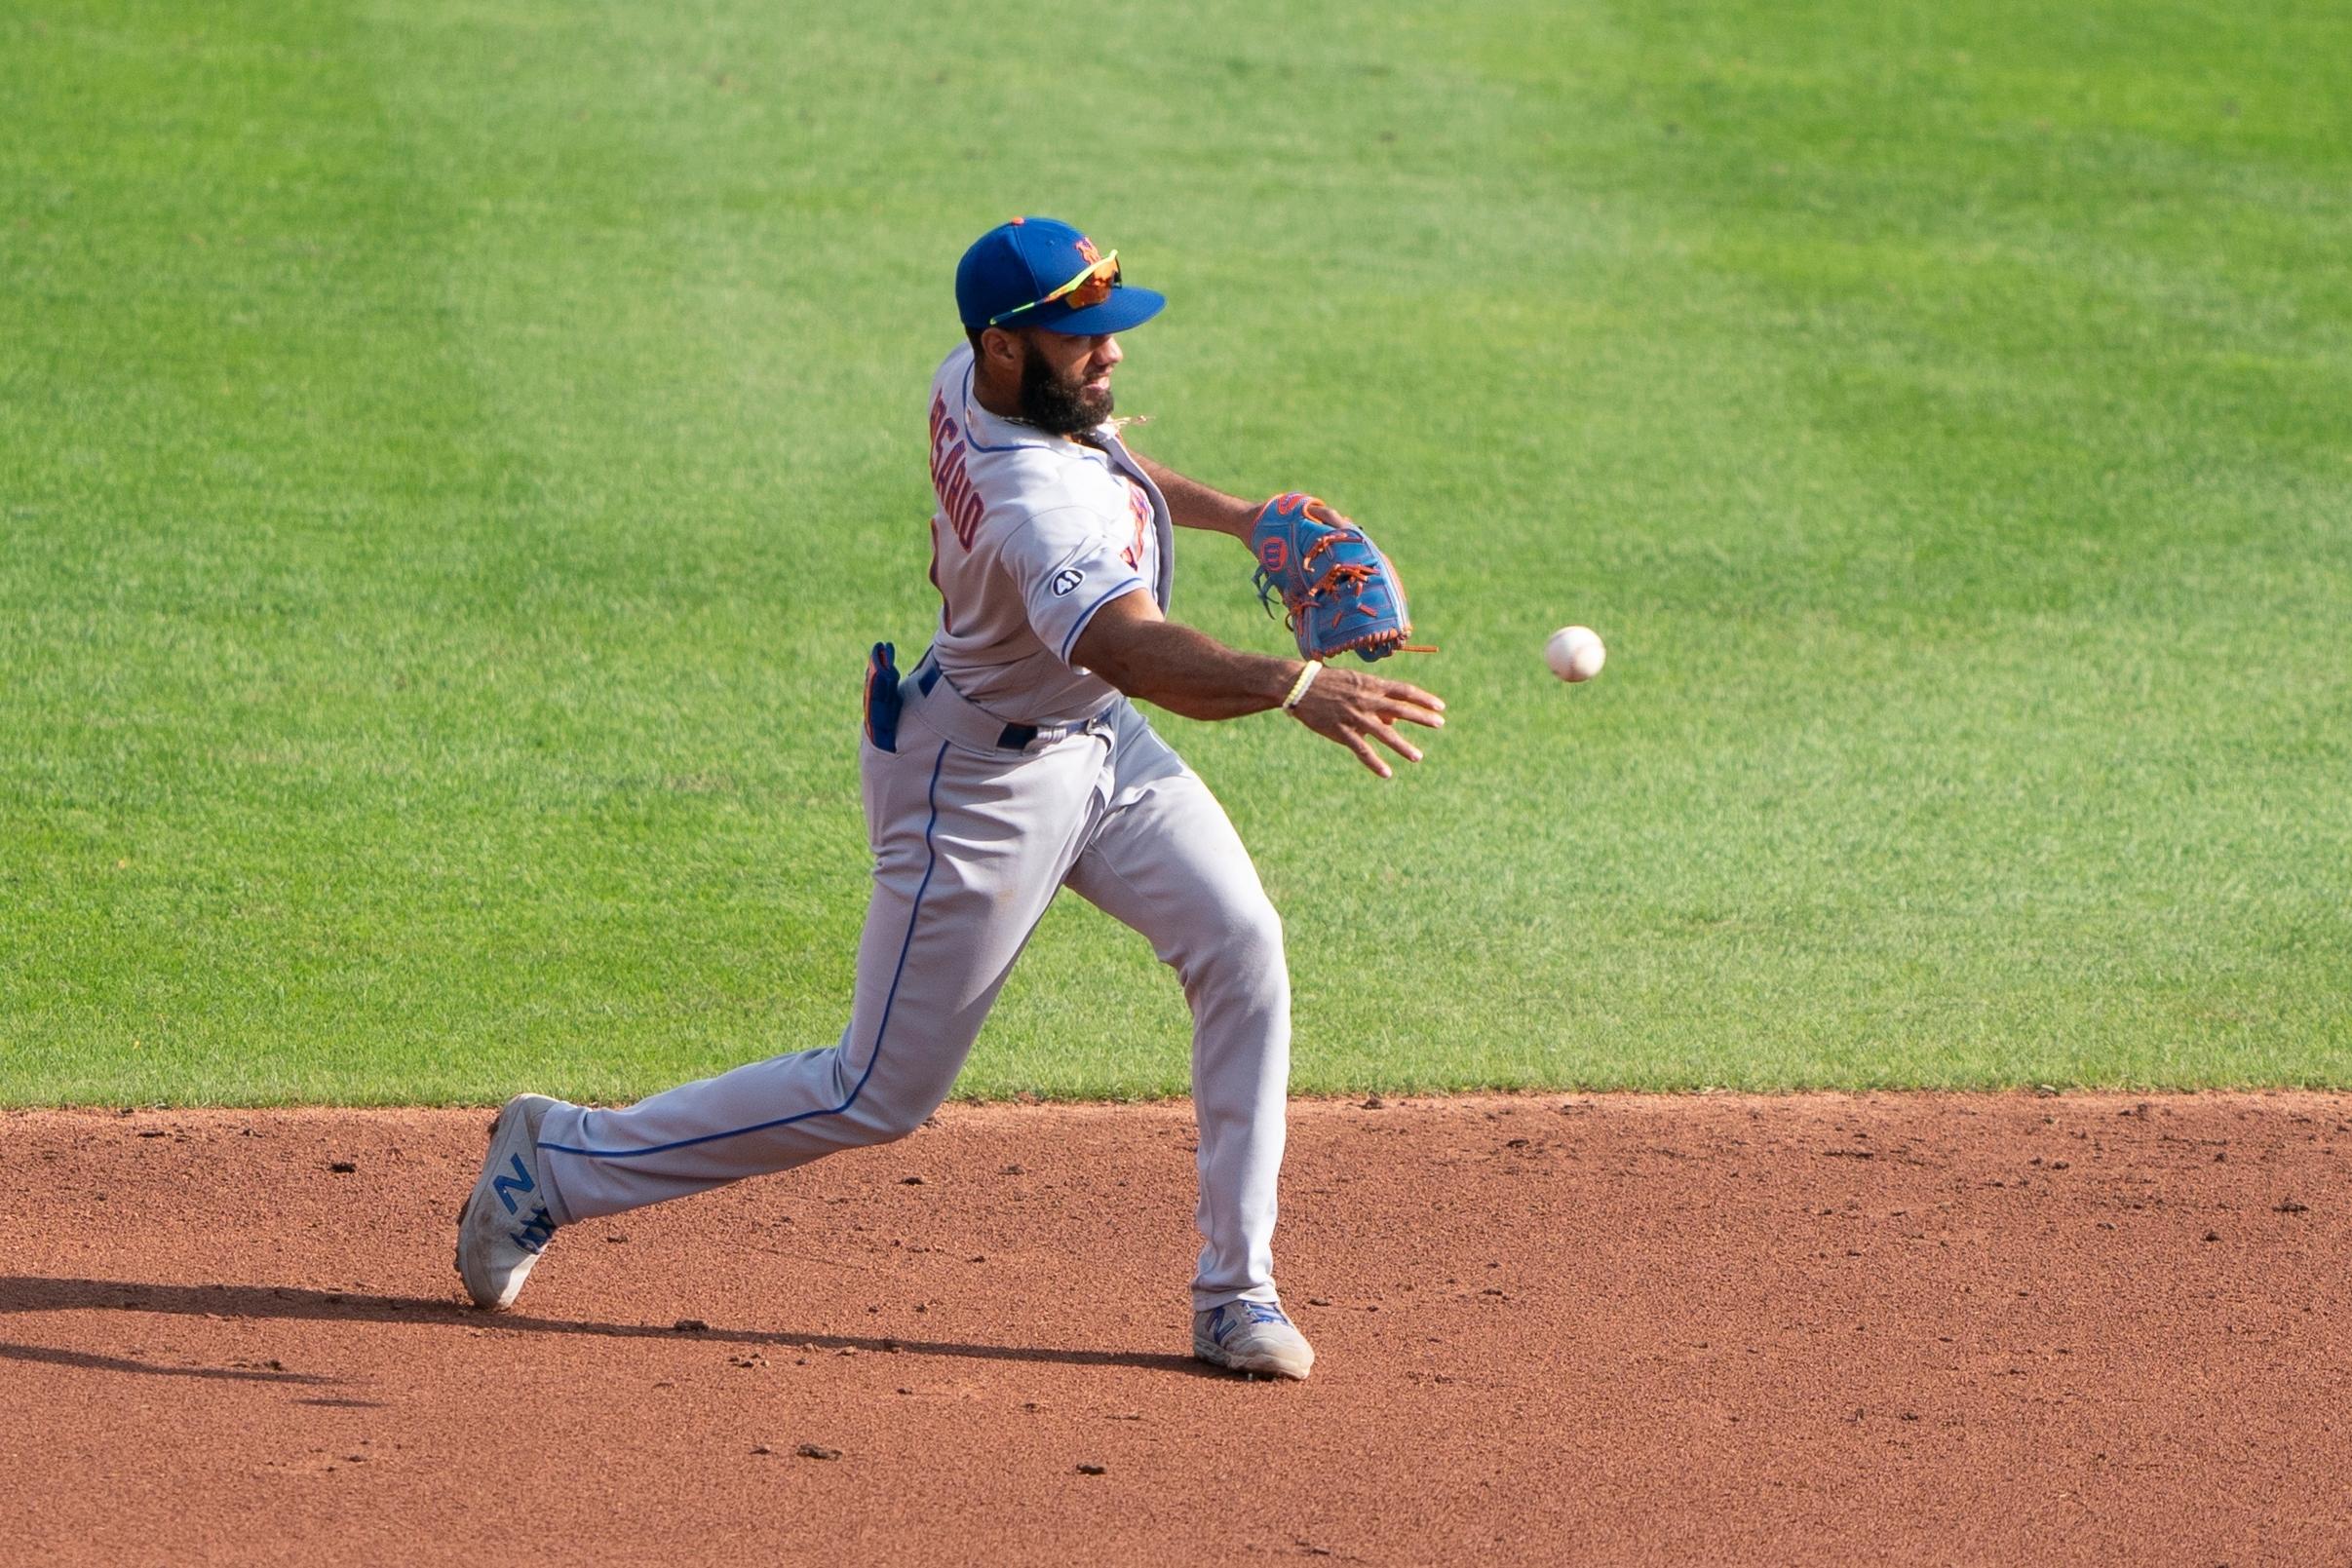 Sep 13, 2020; Buffalo, New York, USA; New York Mets shortstop Amed Rosario (1) throws the ball to second base after fielding a ground ball hit by Toronto Blue Jays center fielder Randal Grichuk (15) (not pictured) during the third inning at Sahlen Field. Mandatory Credit: Gregory Fisher-USA TODAY Sports / © Gregory Fisher-USA TODAY Sports